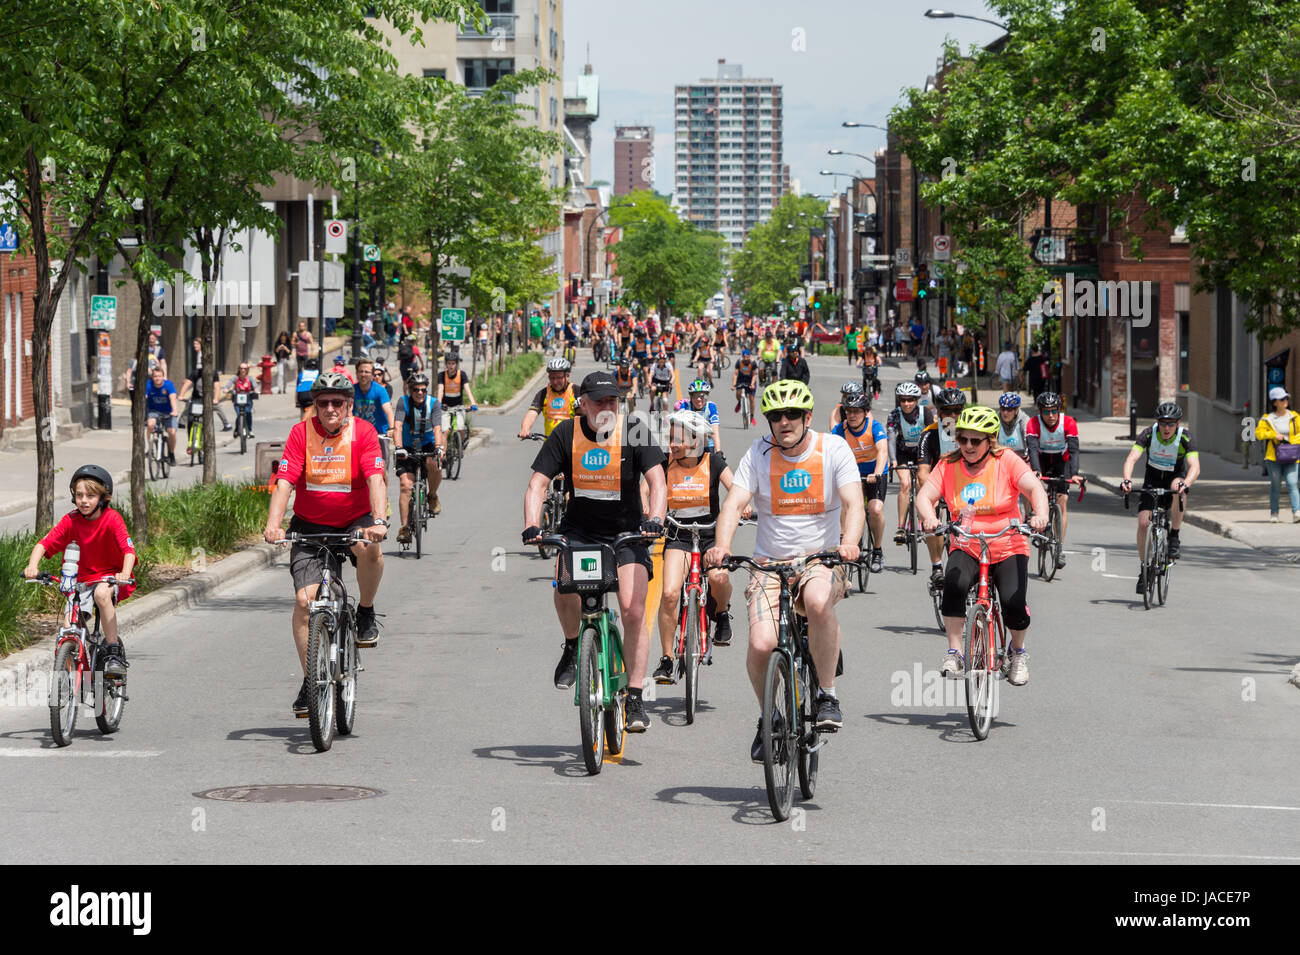 Montreal, Canada - 4 June 2017: Many cyclists take part in Montreal 'Tour de L'île' 2017 Stock Photo